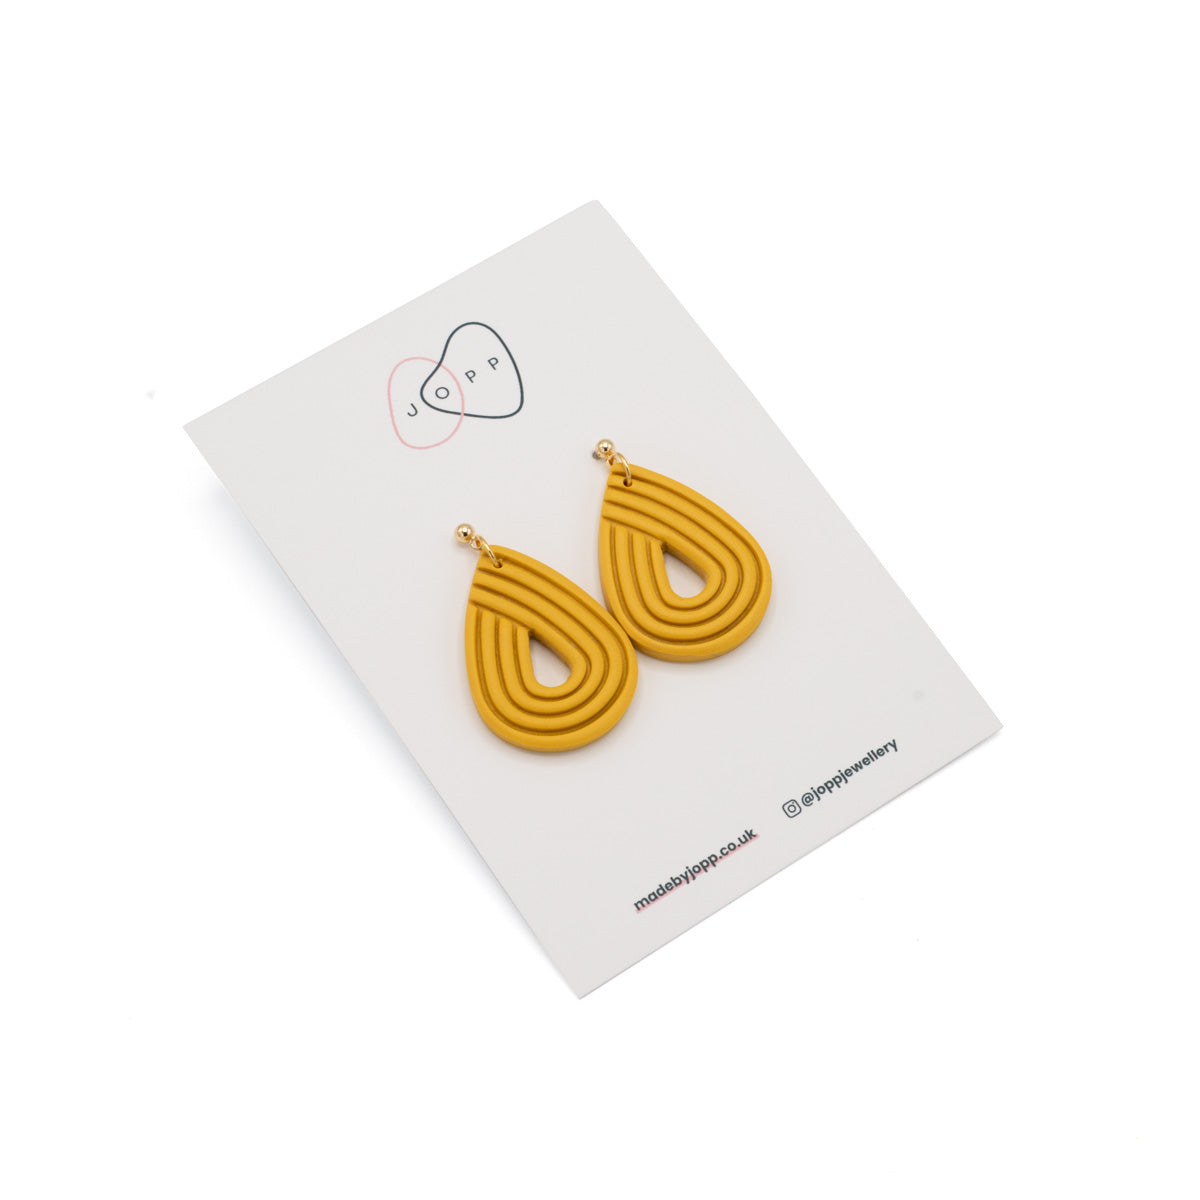 Polymer clay earrings, yellow in an upside down tear drop shape, Photographed against Jopp branded backing card.